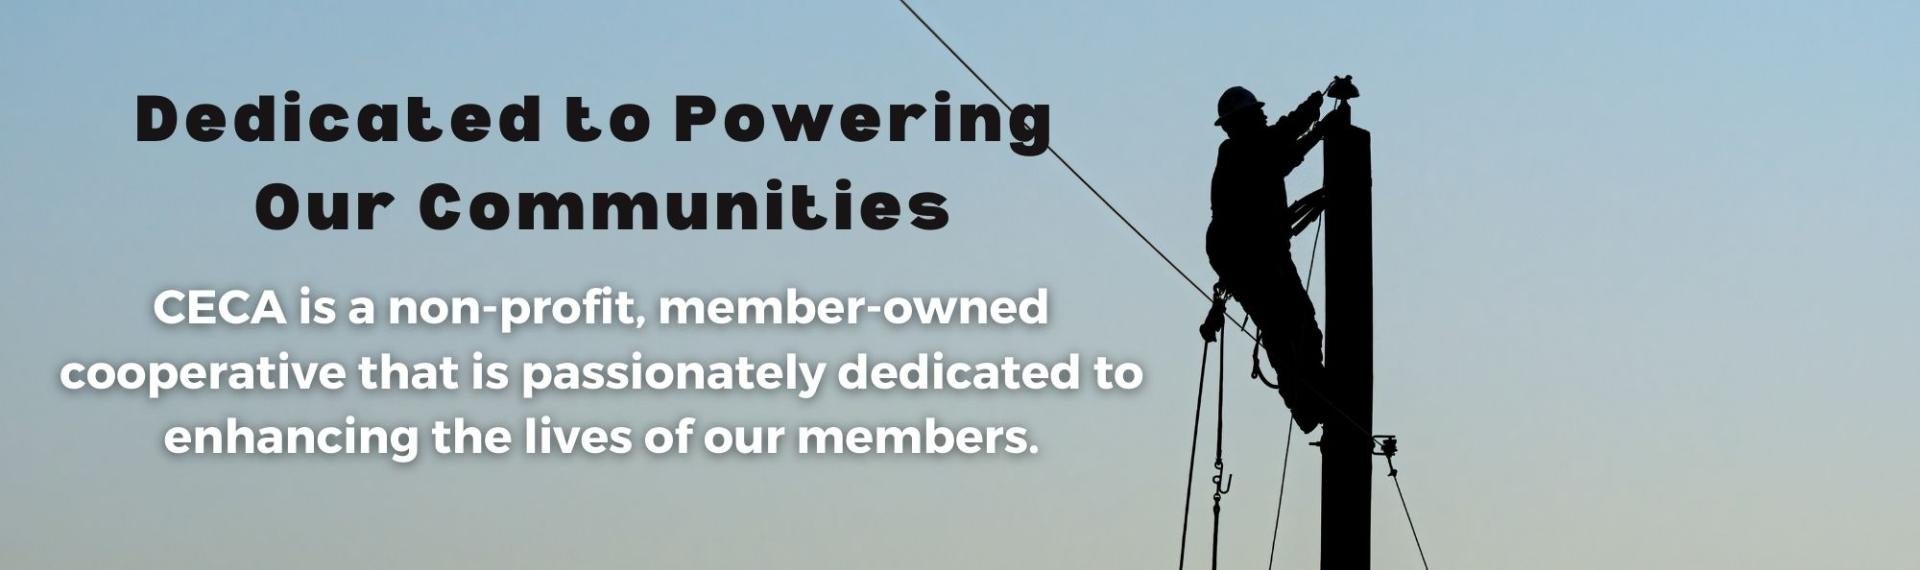 Powering Our Communities